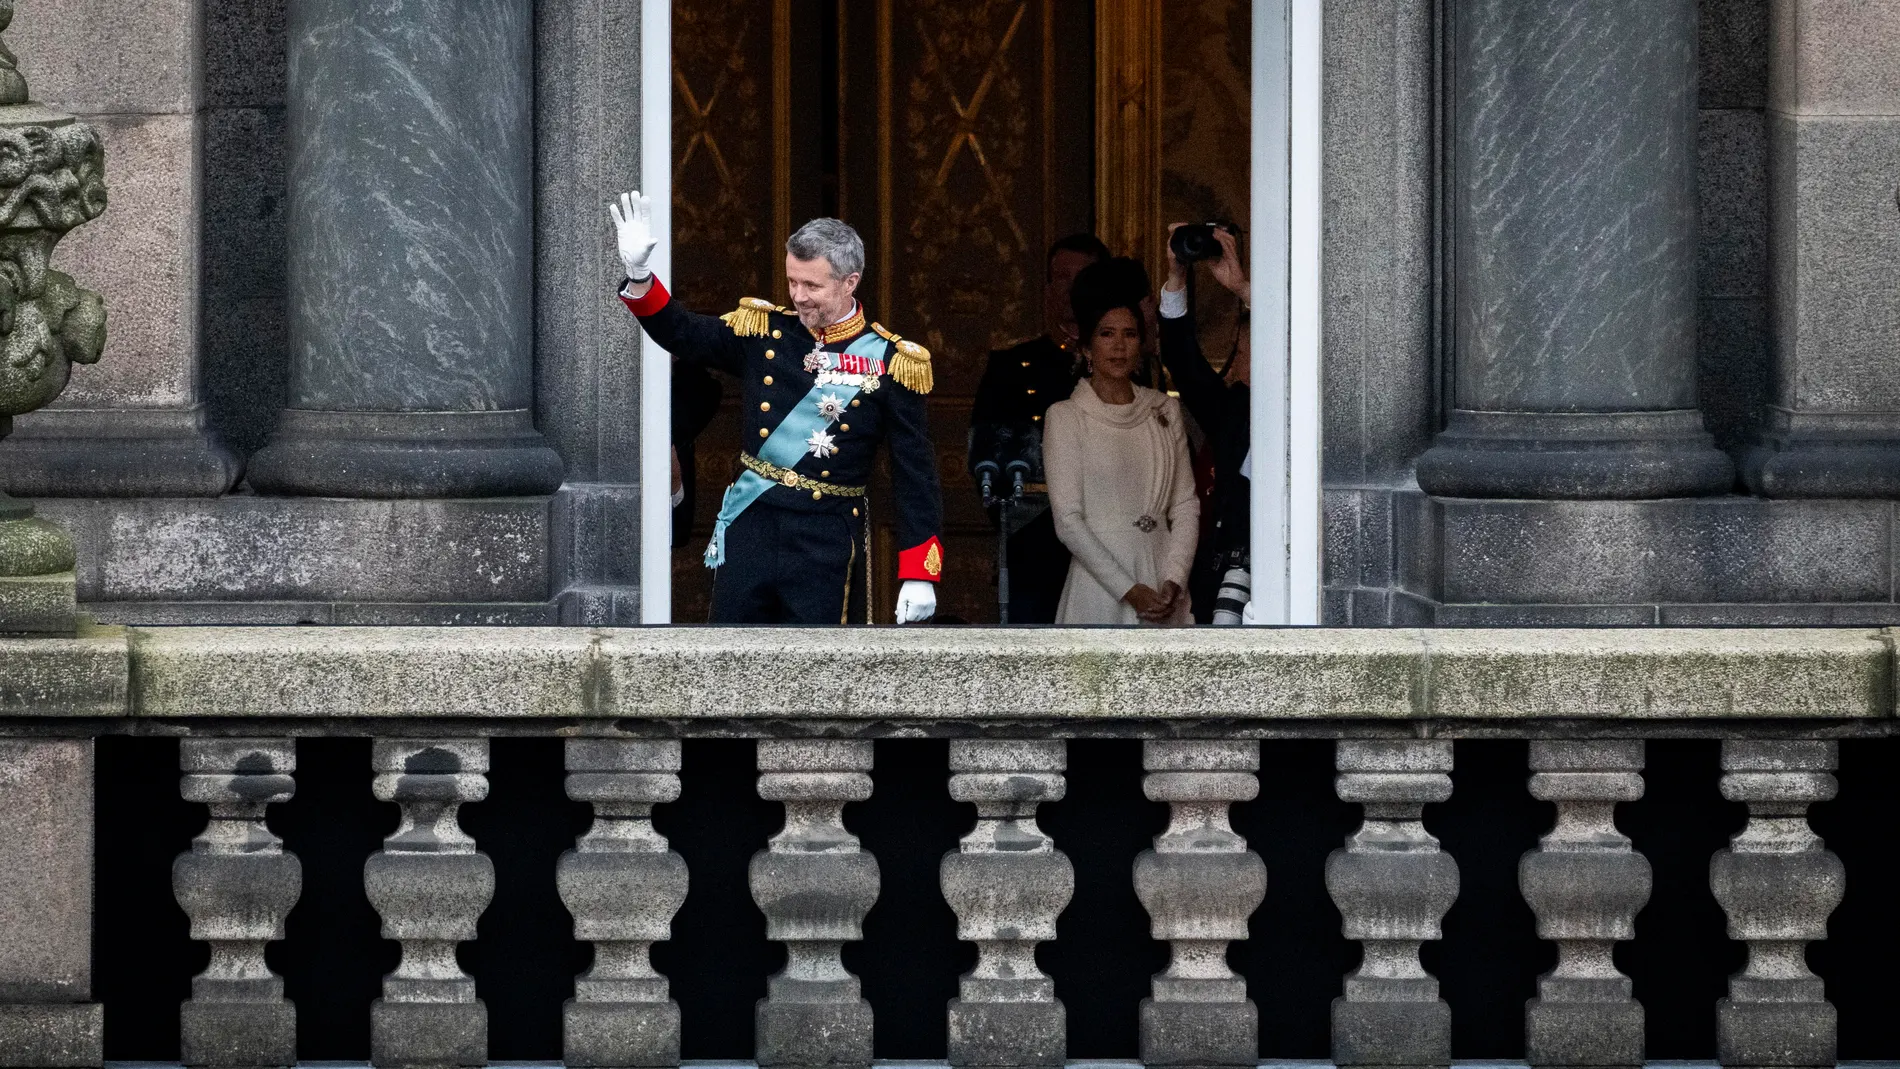 Copenhagen (Denmark), 14/01/2024.- Denmark's King Frederik X (L) waves from the balcony with Queen Mary looking on in the background after the proclamation of the accession to the throne at Christiansborg Palace Square in Copenhagen, Denmark, 14 January 2024. Denmark's Queen Margrethe II announced in her New Year's speech on 31 December 2023 that she would abdicate on 14 January 2024, the 52nd anniversary of her accession to the throne. Her eldest son, Crown Prince Frederik, is set to succeed...